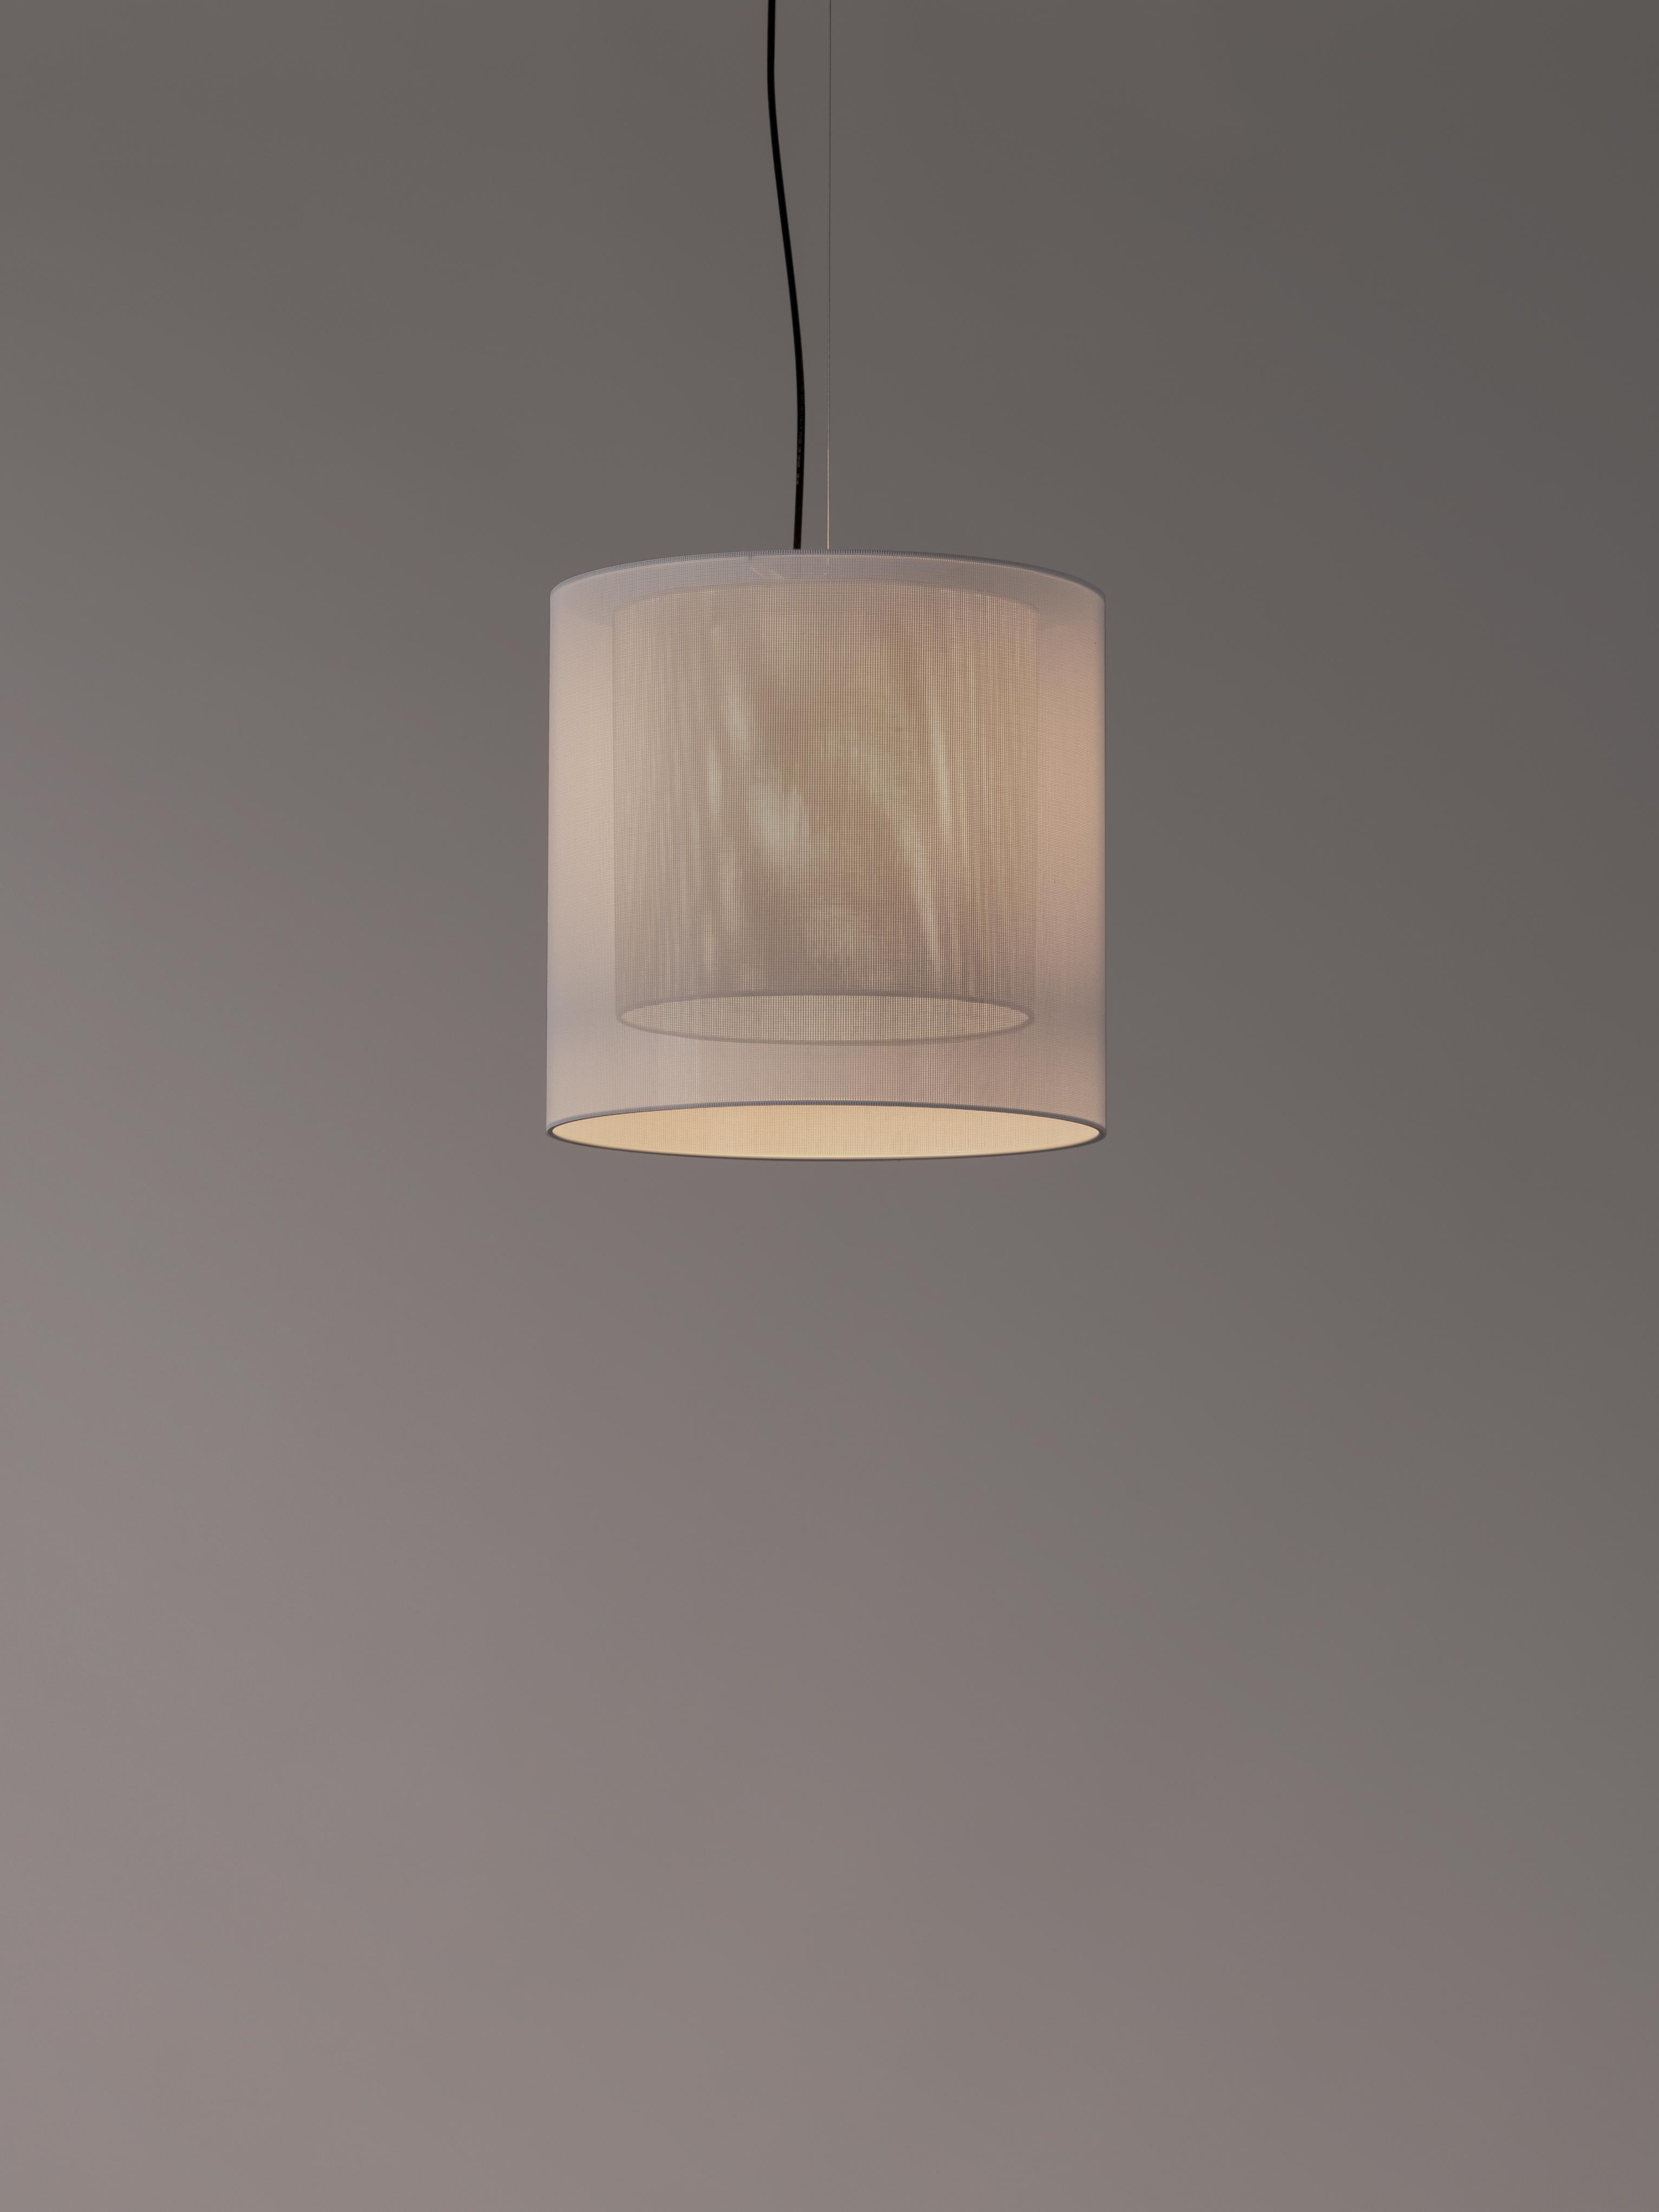 White and grey moaré MS pendant lamp by Antoni Arola
Dimensions: D 46 x H 45 cm
Materials: Metal, polyester.
Available in other colors and sizes.

Moaré’s multiple combinations of formats and colours make it highly versatile. The series takes